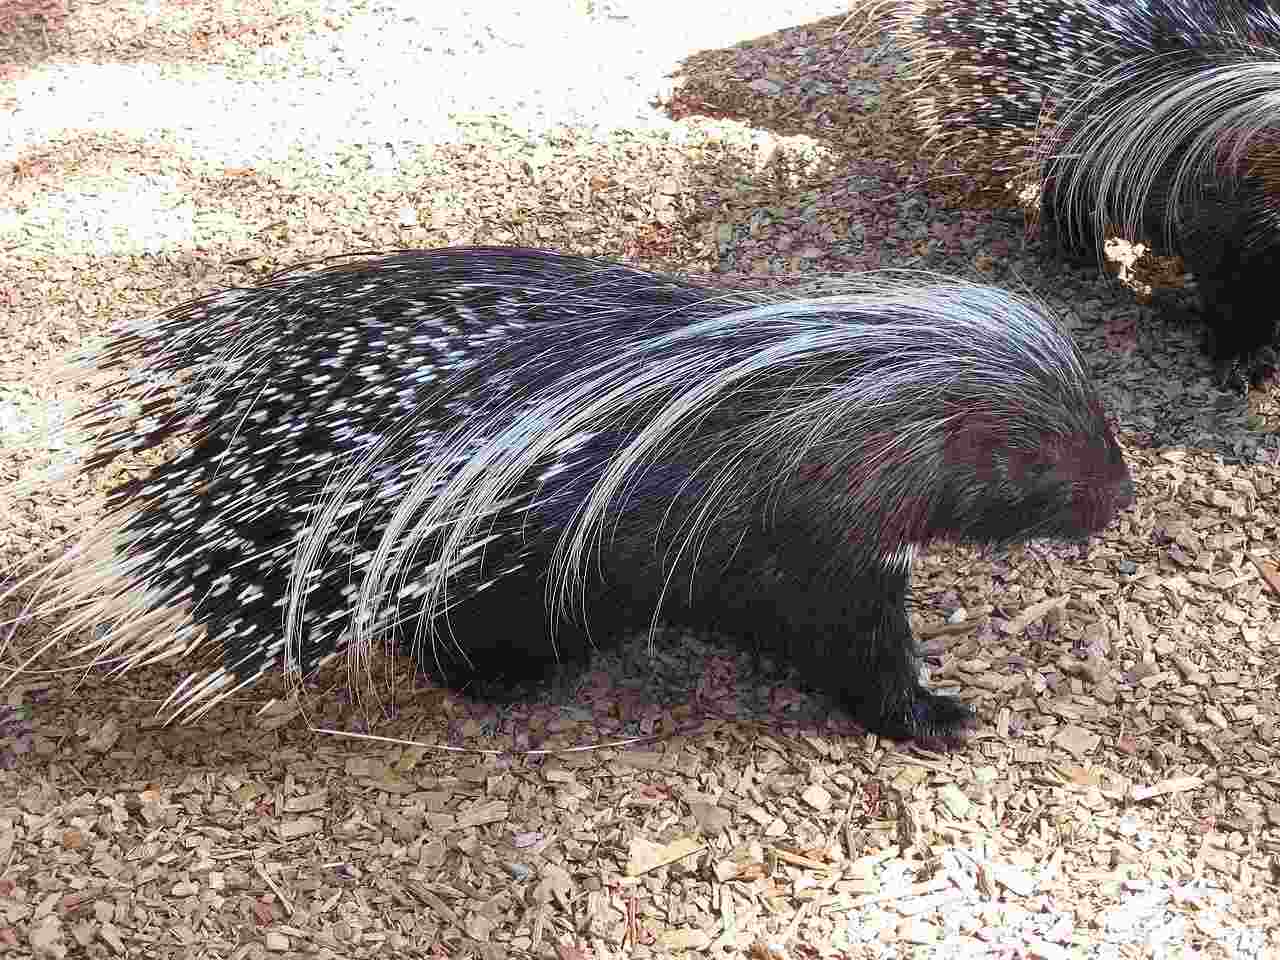 Fun Old World Porcupine Facts For Kids